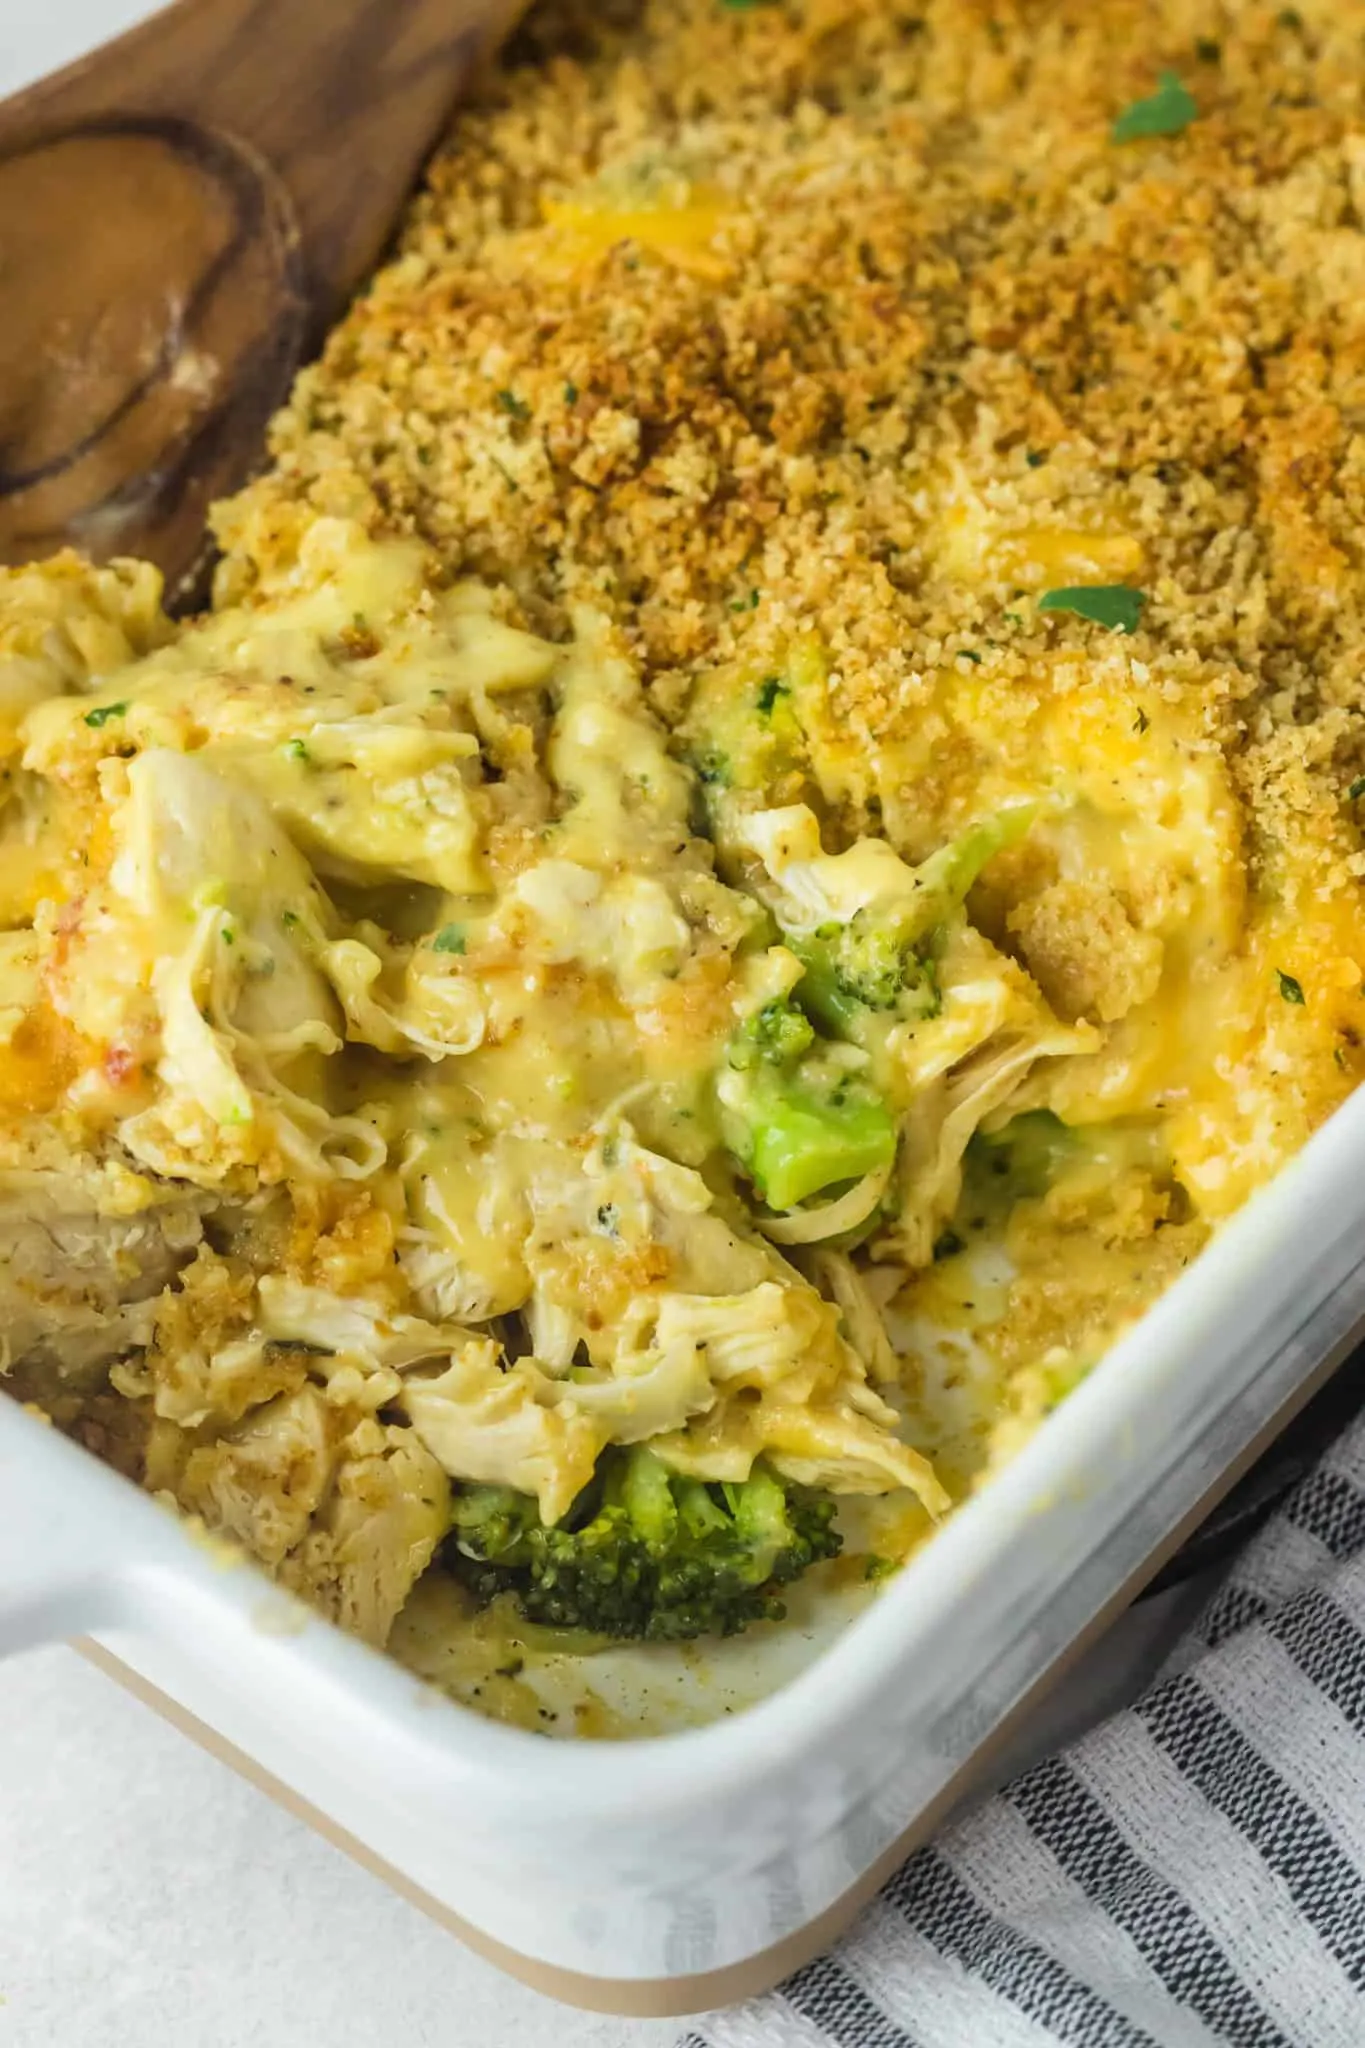 Chicken Divan is a creamy, cheesy chicken and broccoli casserole with a breadcrumb topping.